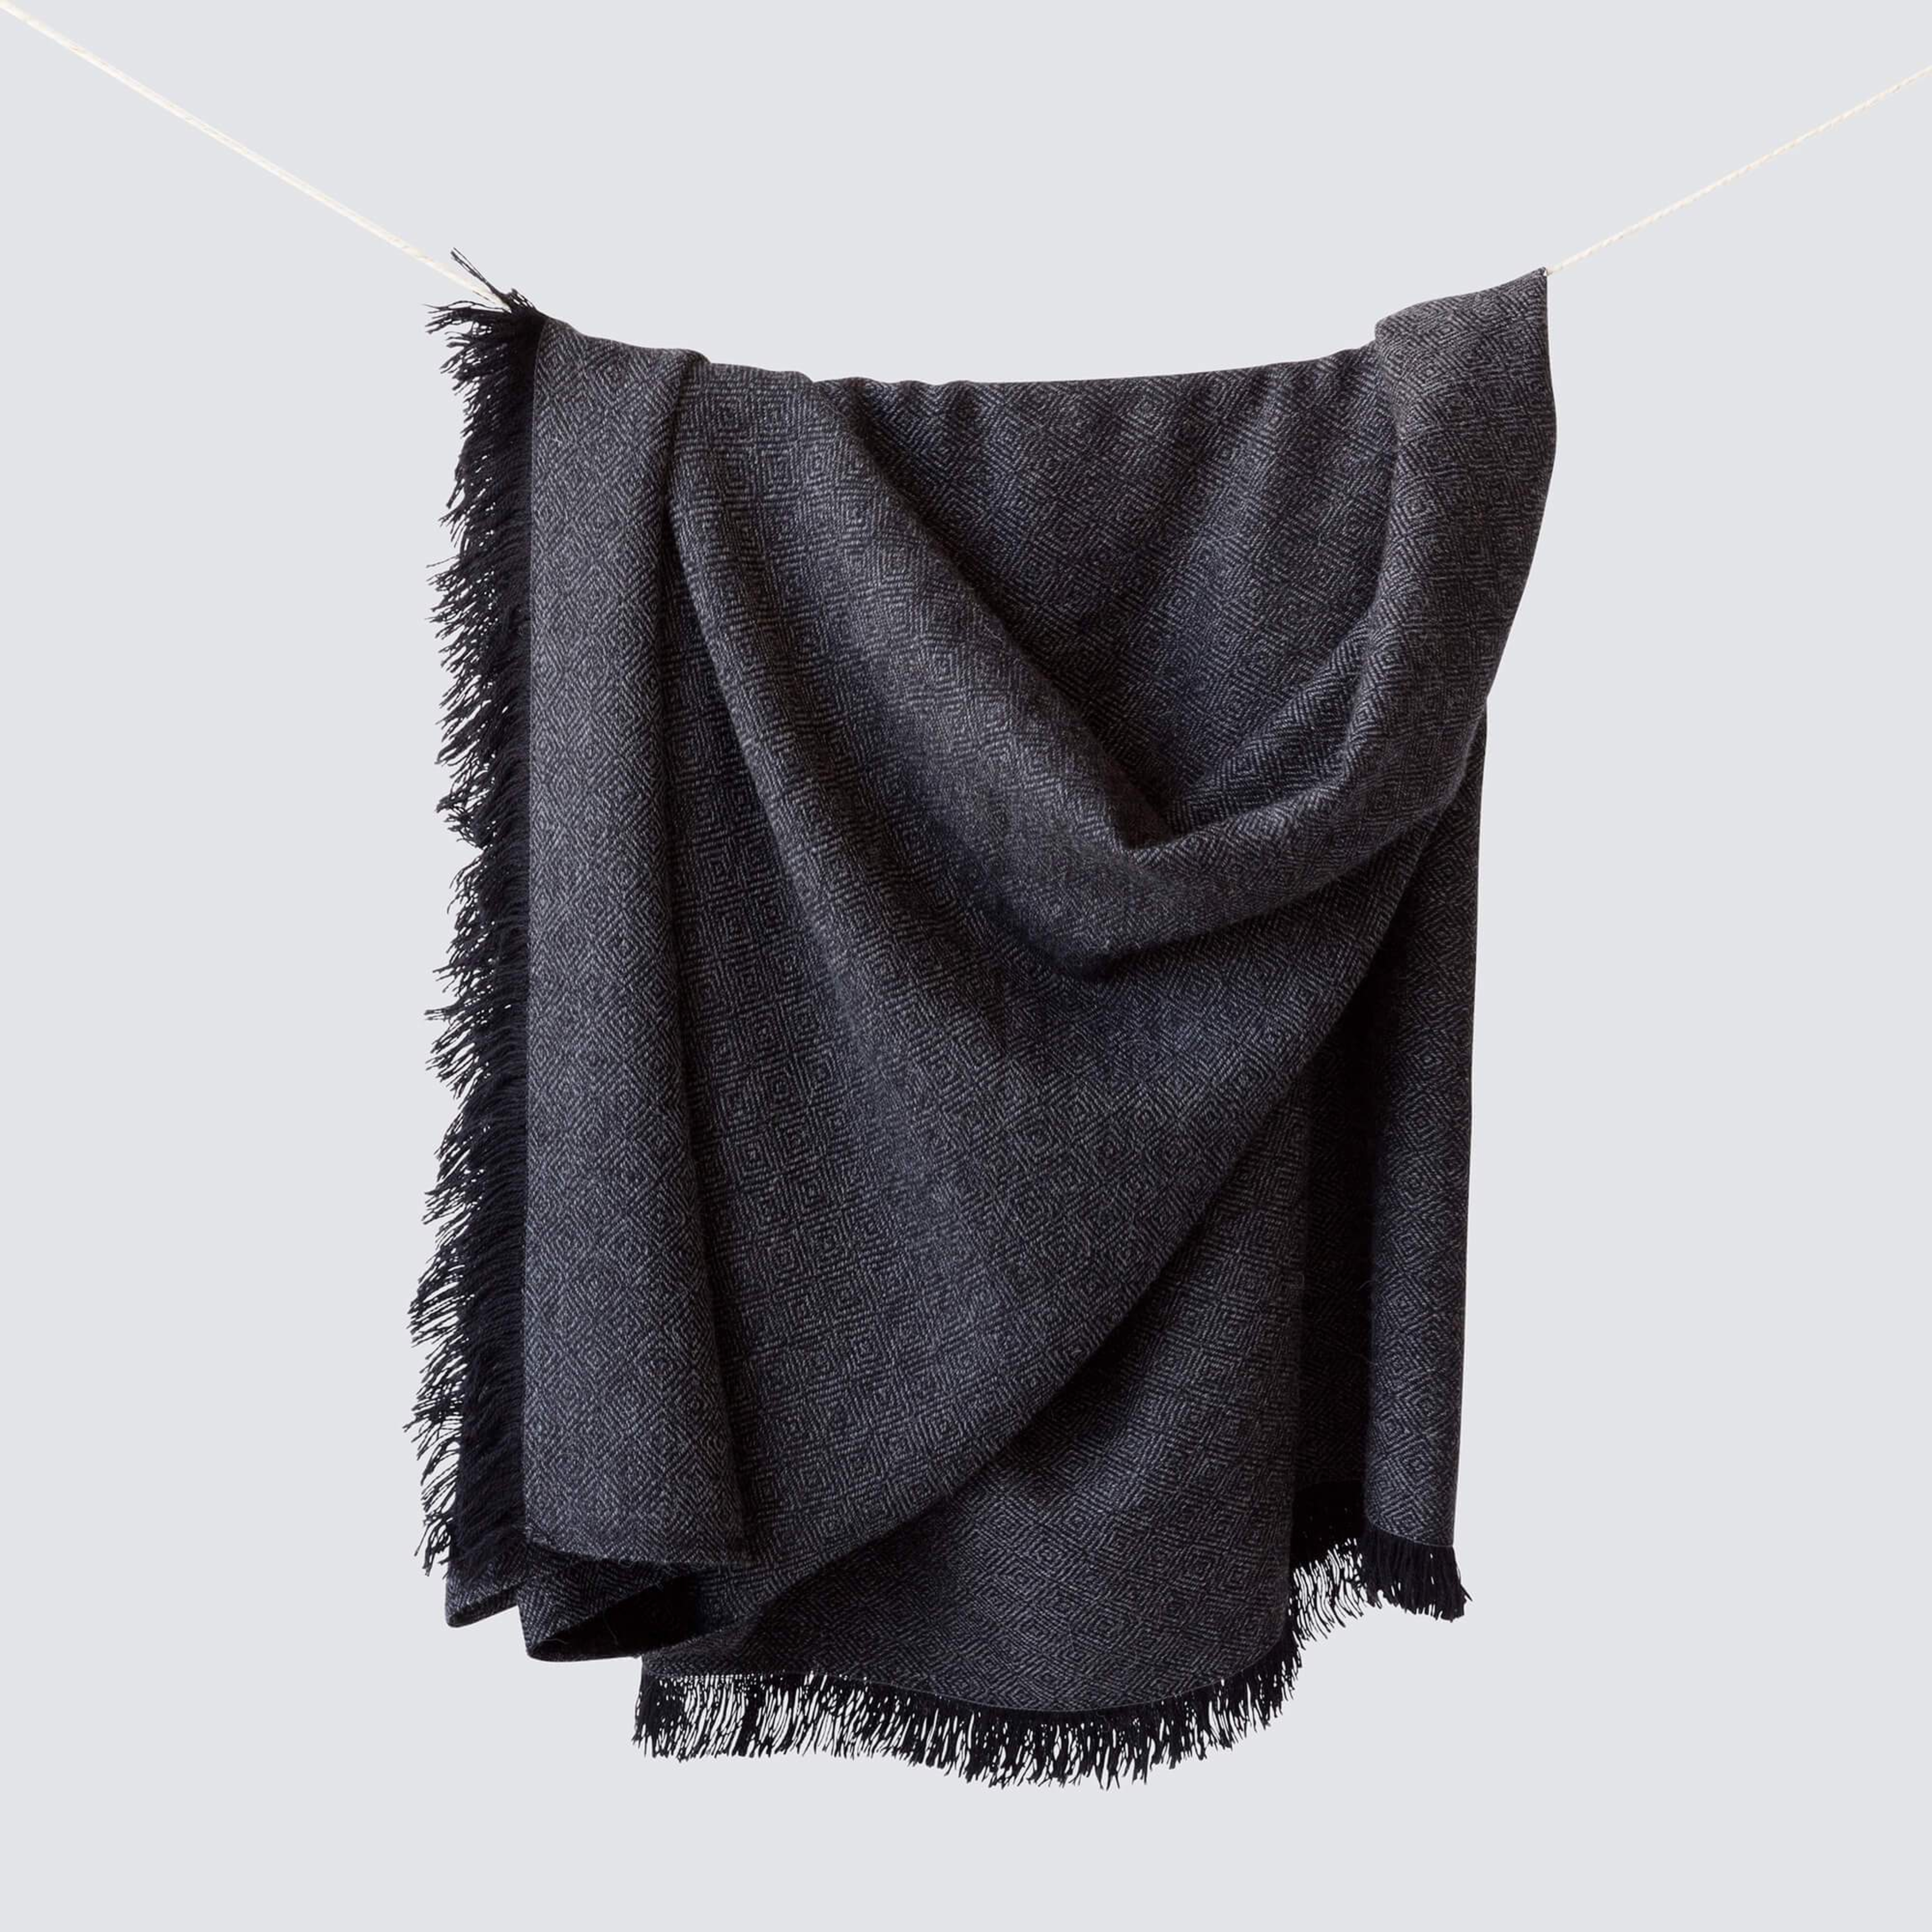 La Calle Alpaca Throw By The Citizenry - The Citizenry